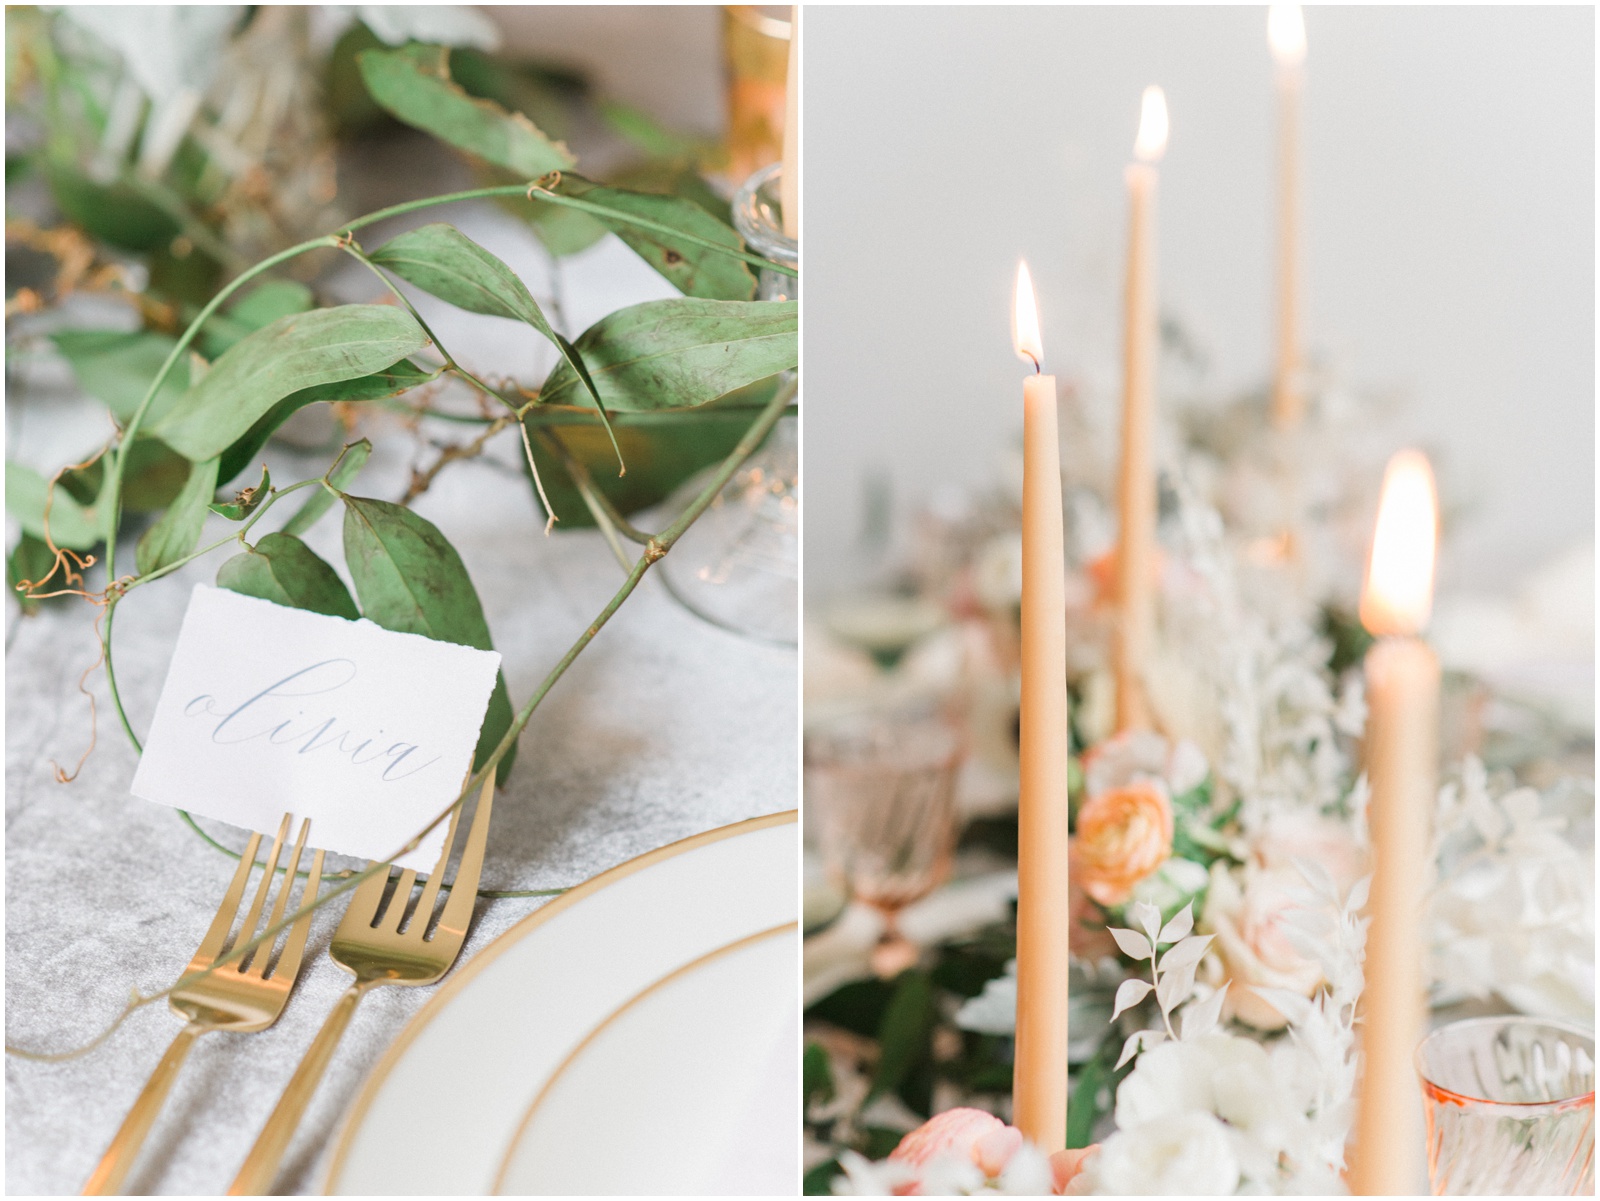 2020 wedding trends peach candles